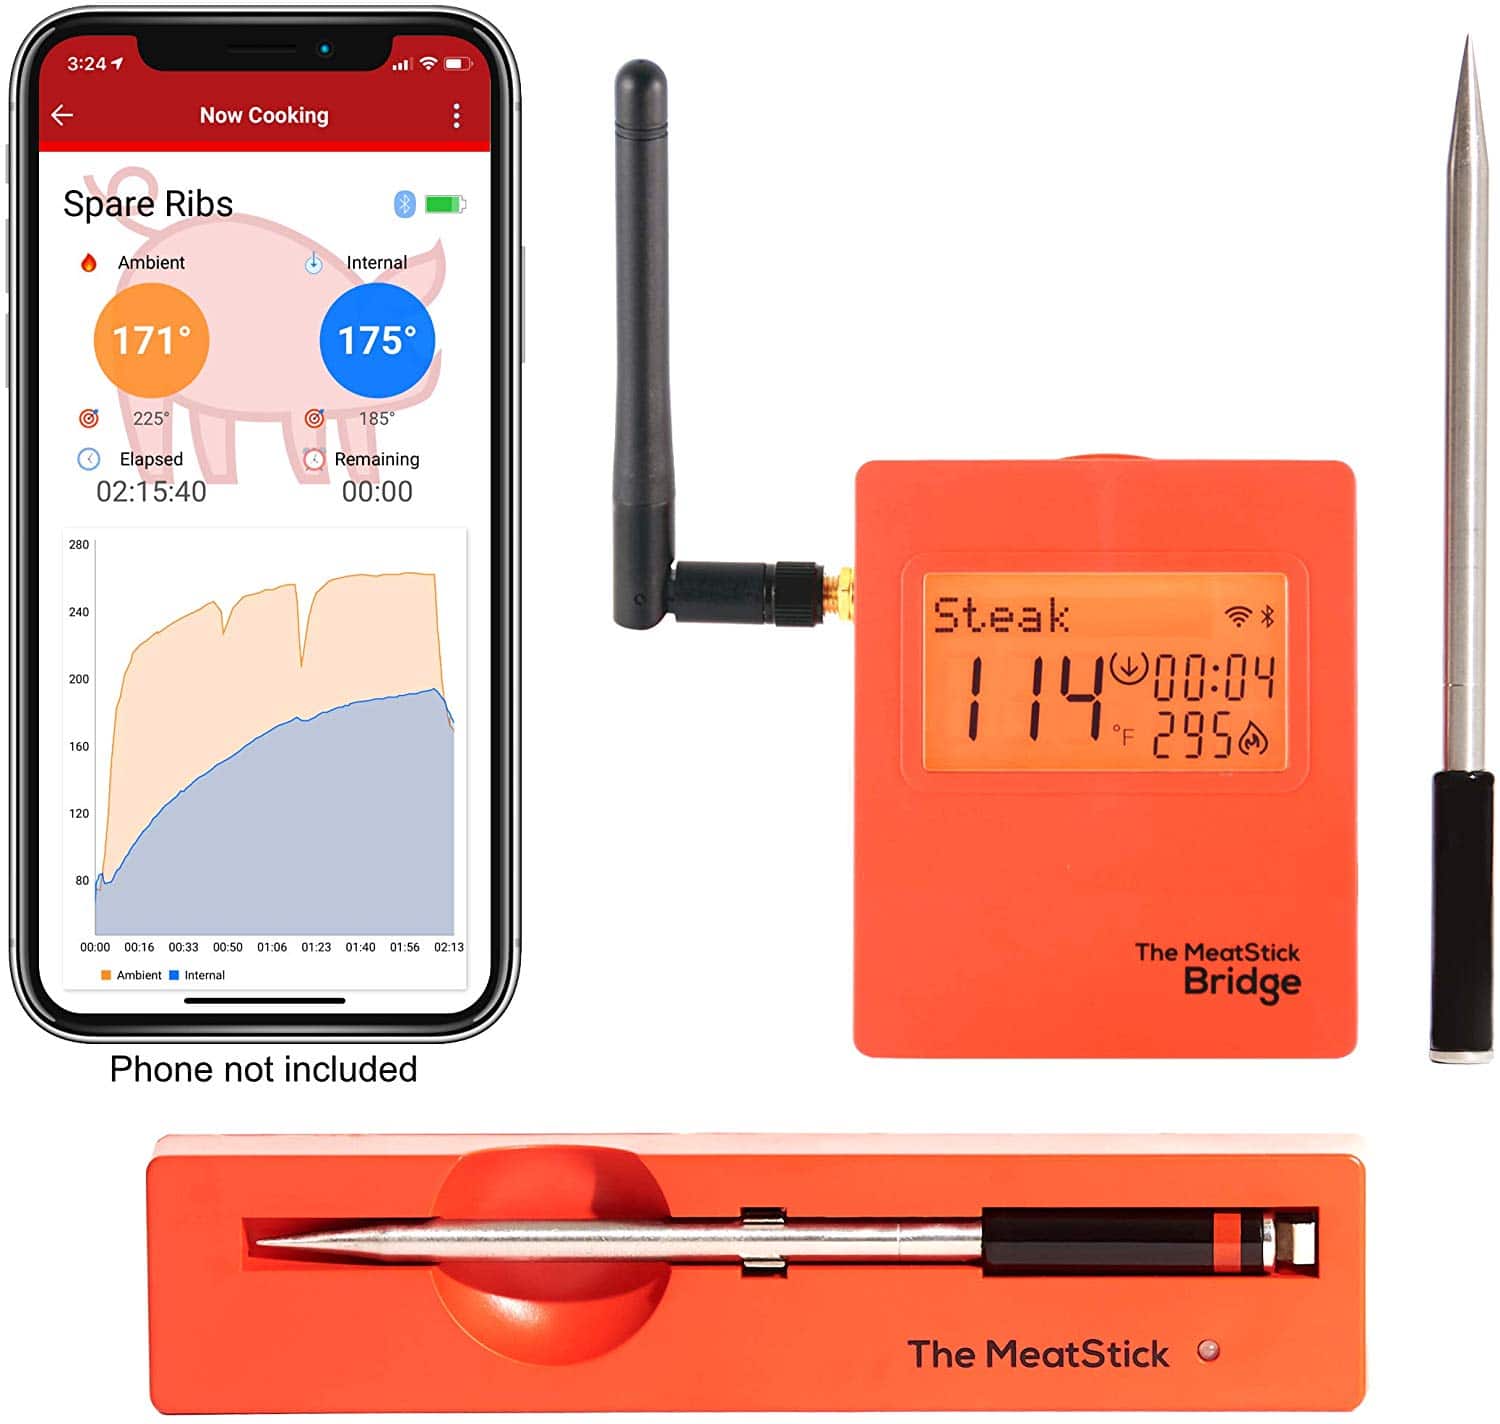 WiFi Travel Pack, The MeatStick